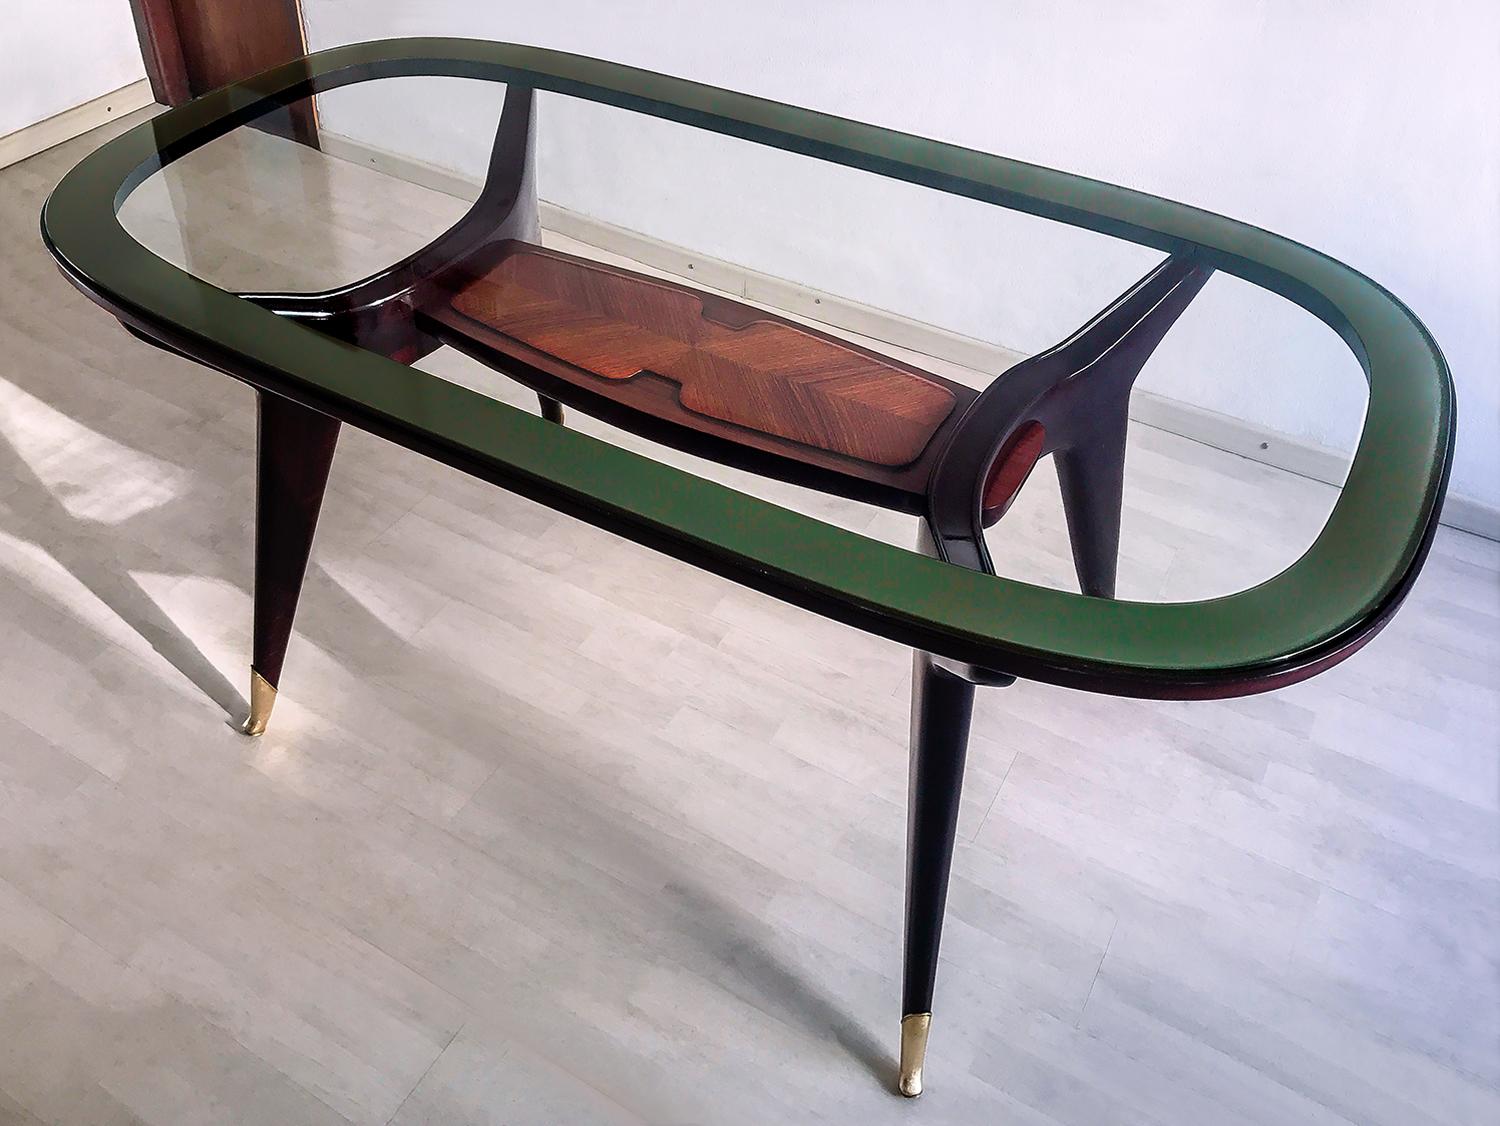 Stunning dining table, very well designed by Vittorio Dassi in the 1950s.
The rosewood structure has tapering legs finished with fine brass sabots, and its unique design is given by the sinuous shape of the arms that support the thick oval